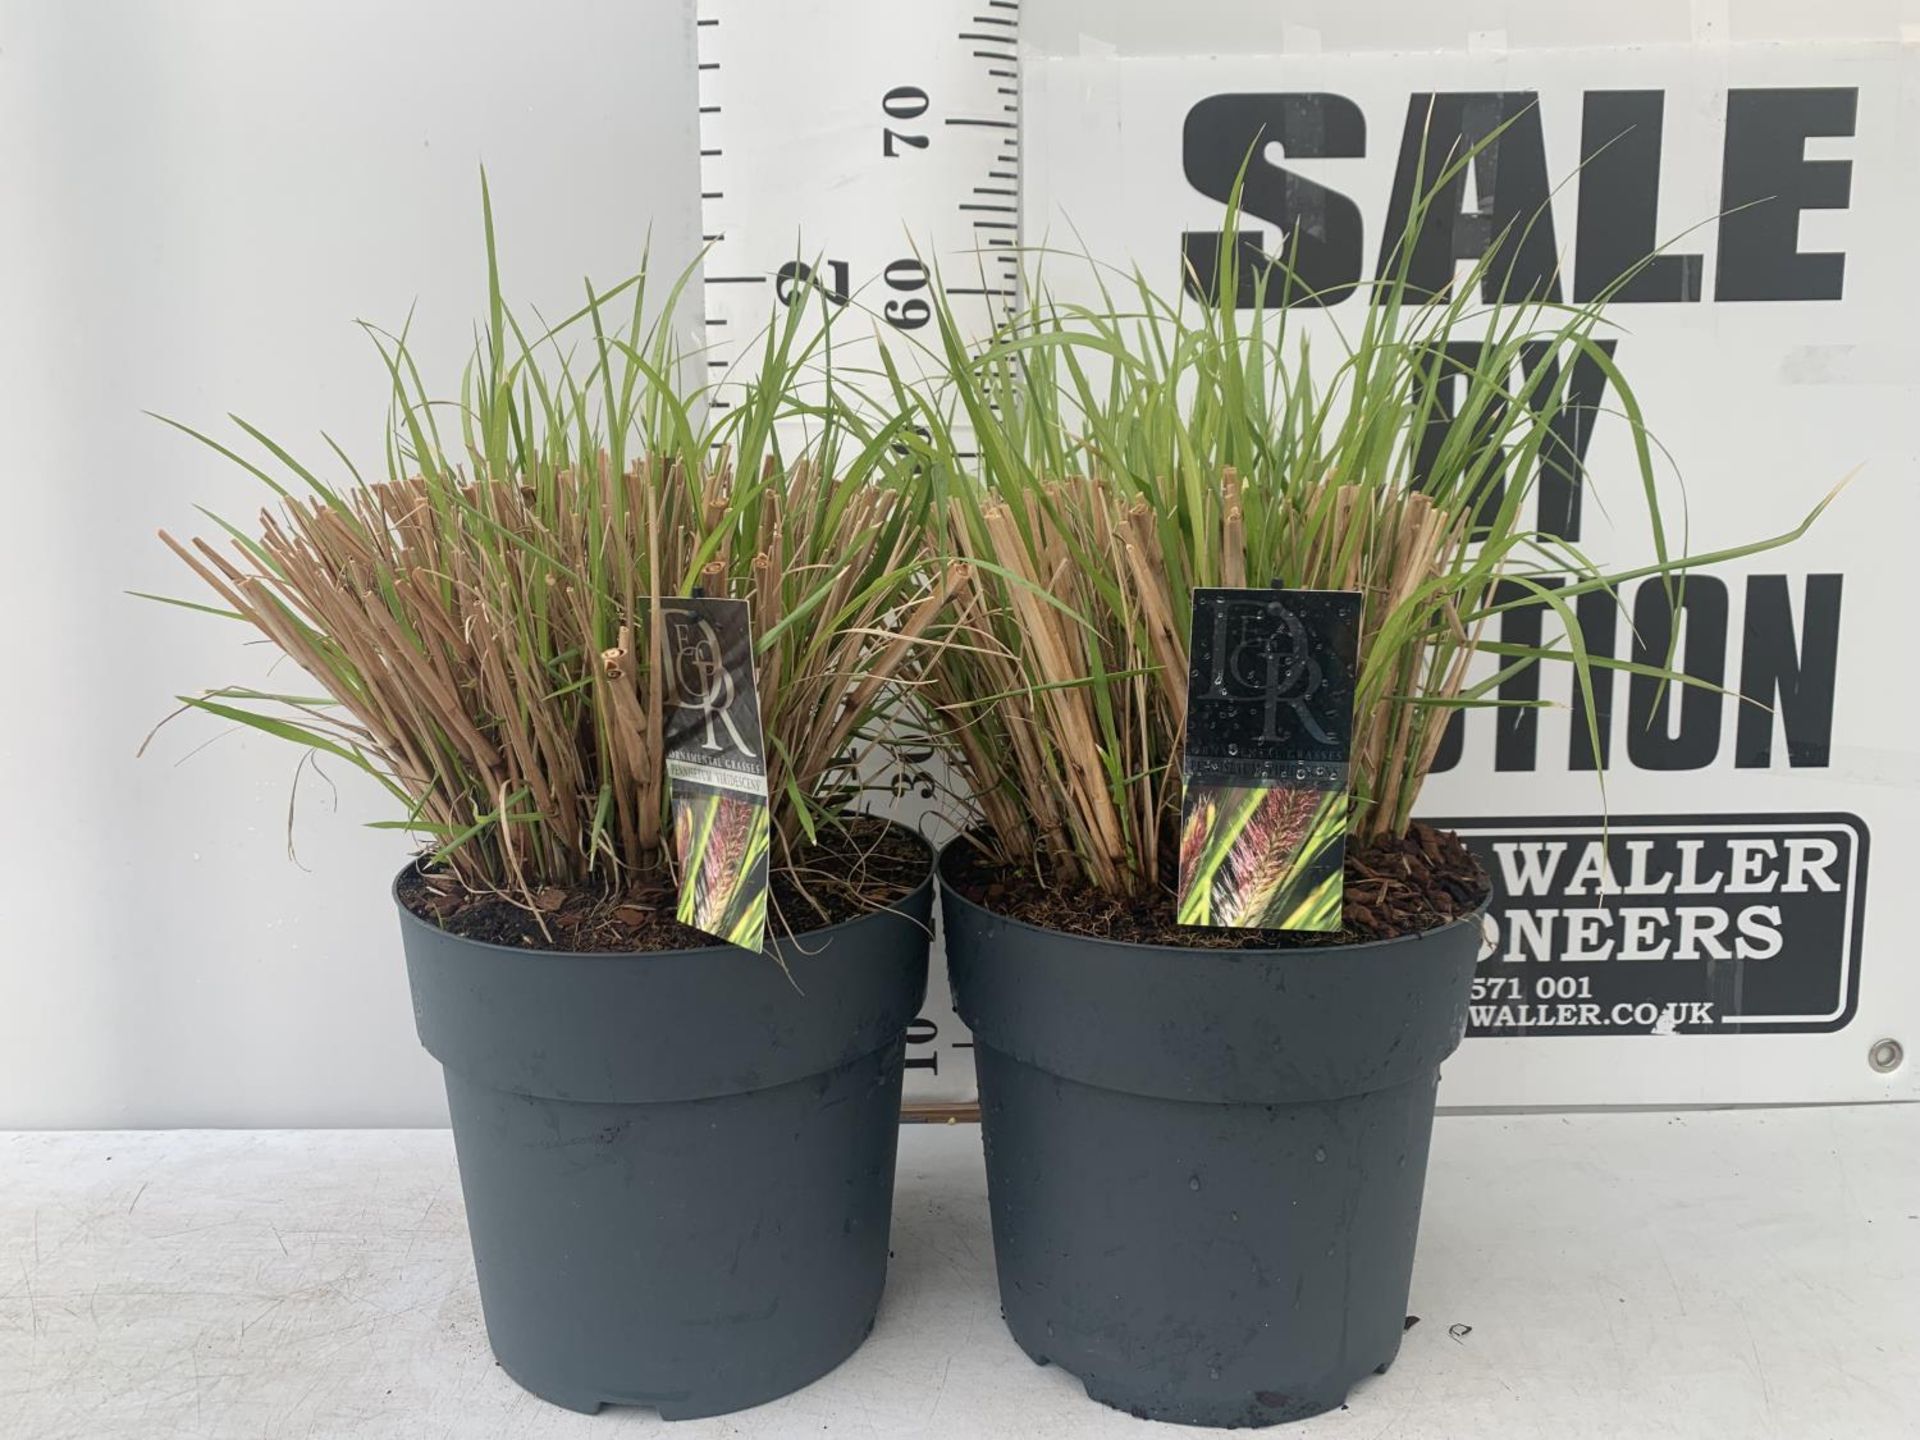 TWO ORNAMENTAL GRASSES 'PENNISETUM VIRIDESCENS' IN 10 LTR POTS APPROX 60CM IN HEIGHT PLUS VAT TO